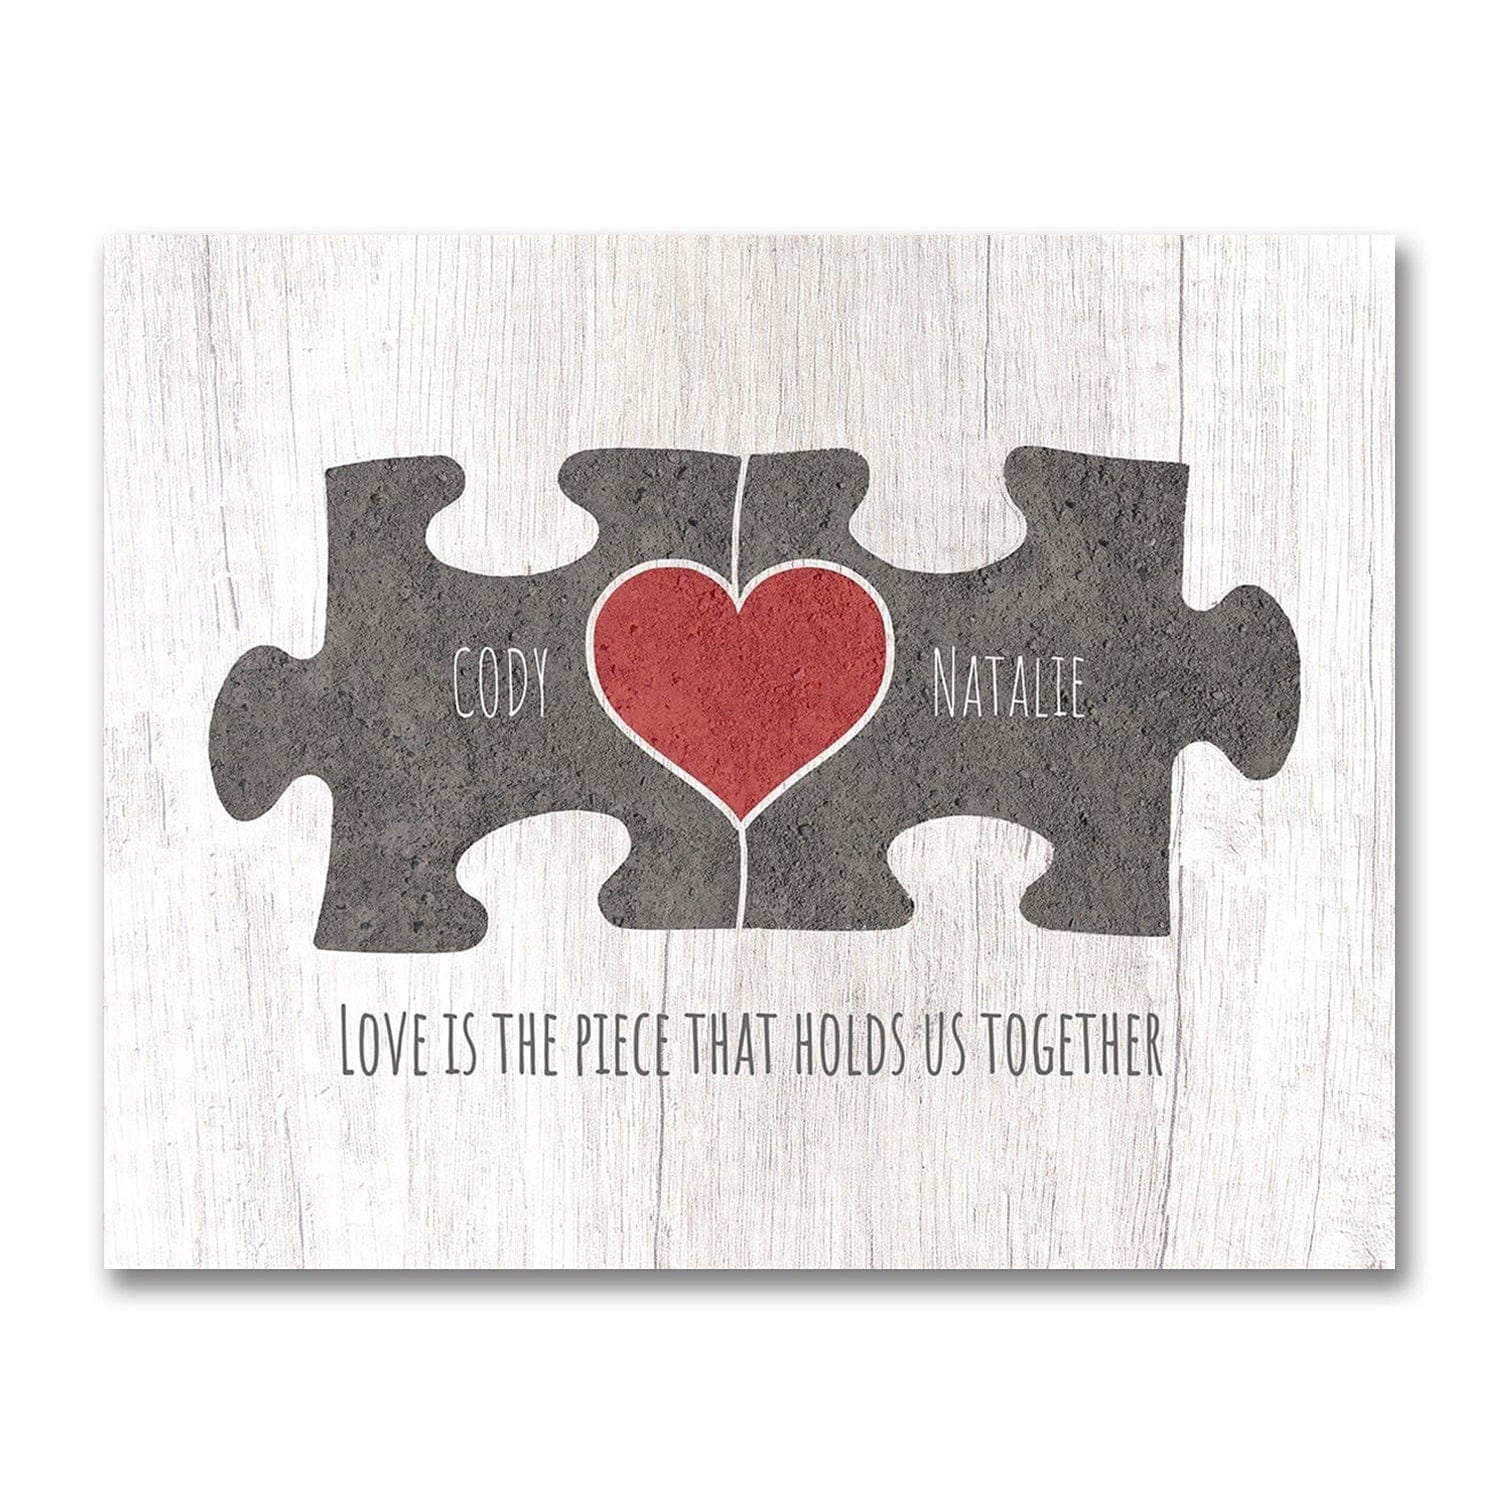 Love is the piece that holds us together - personalized gift